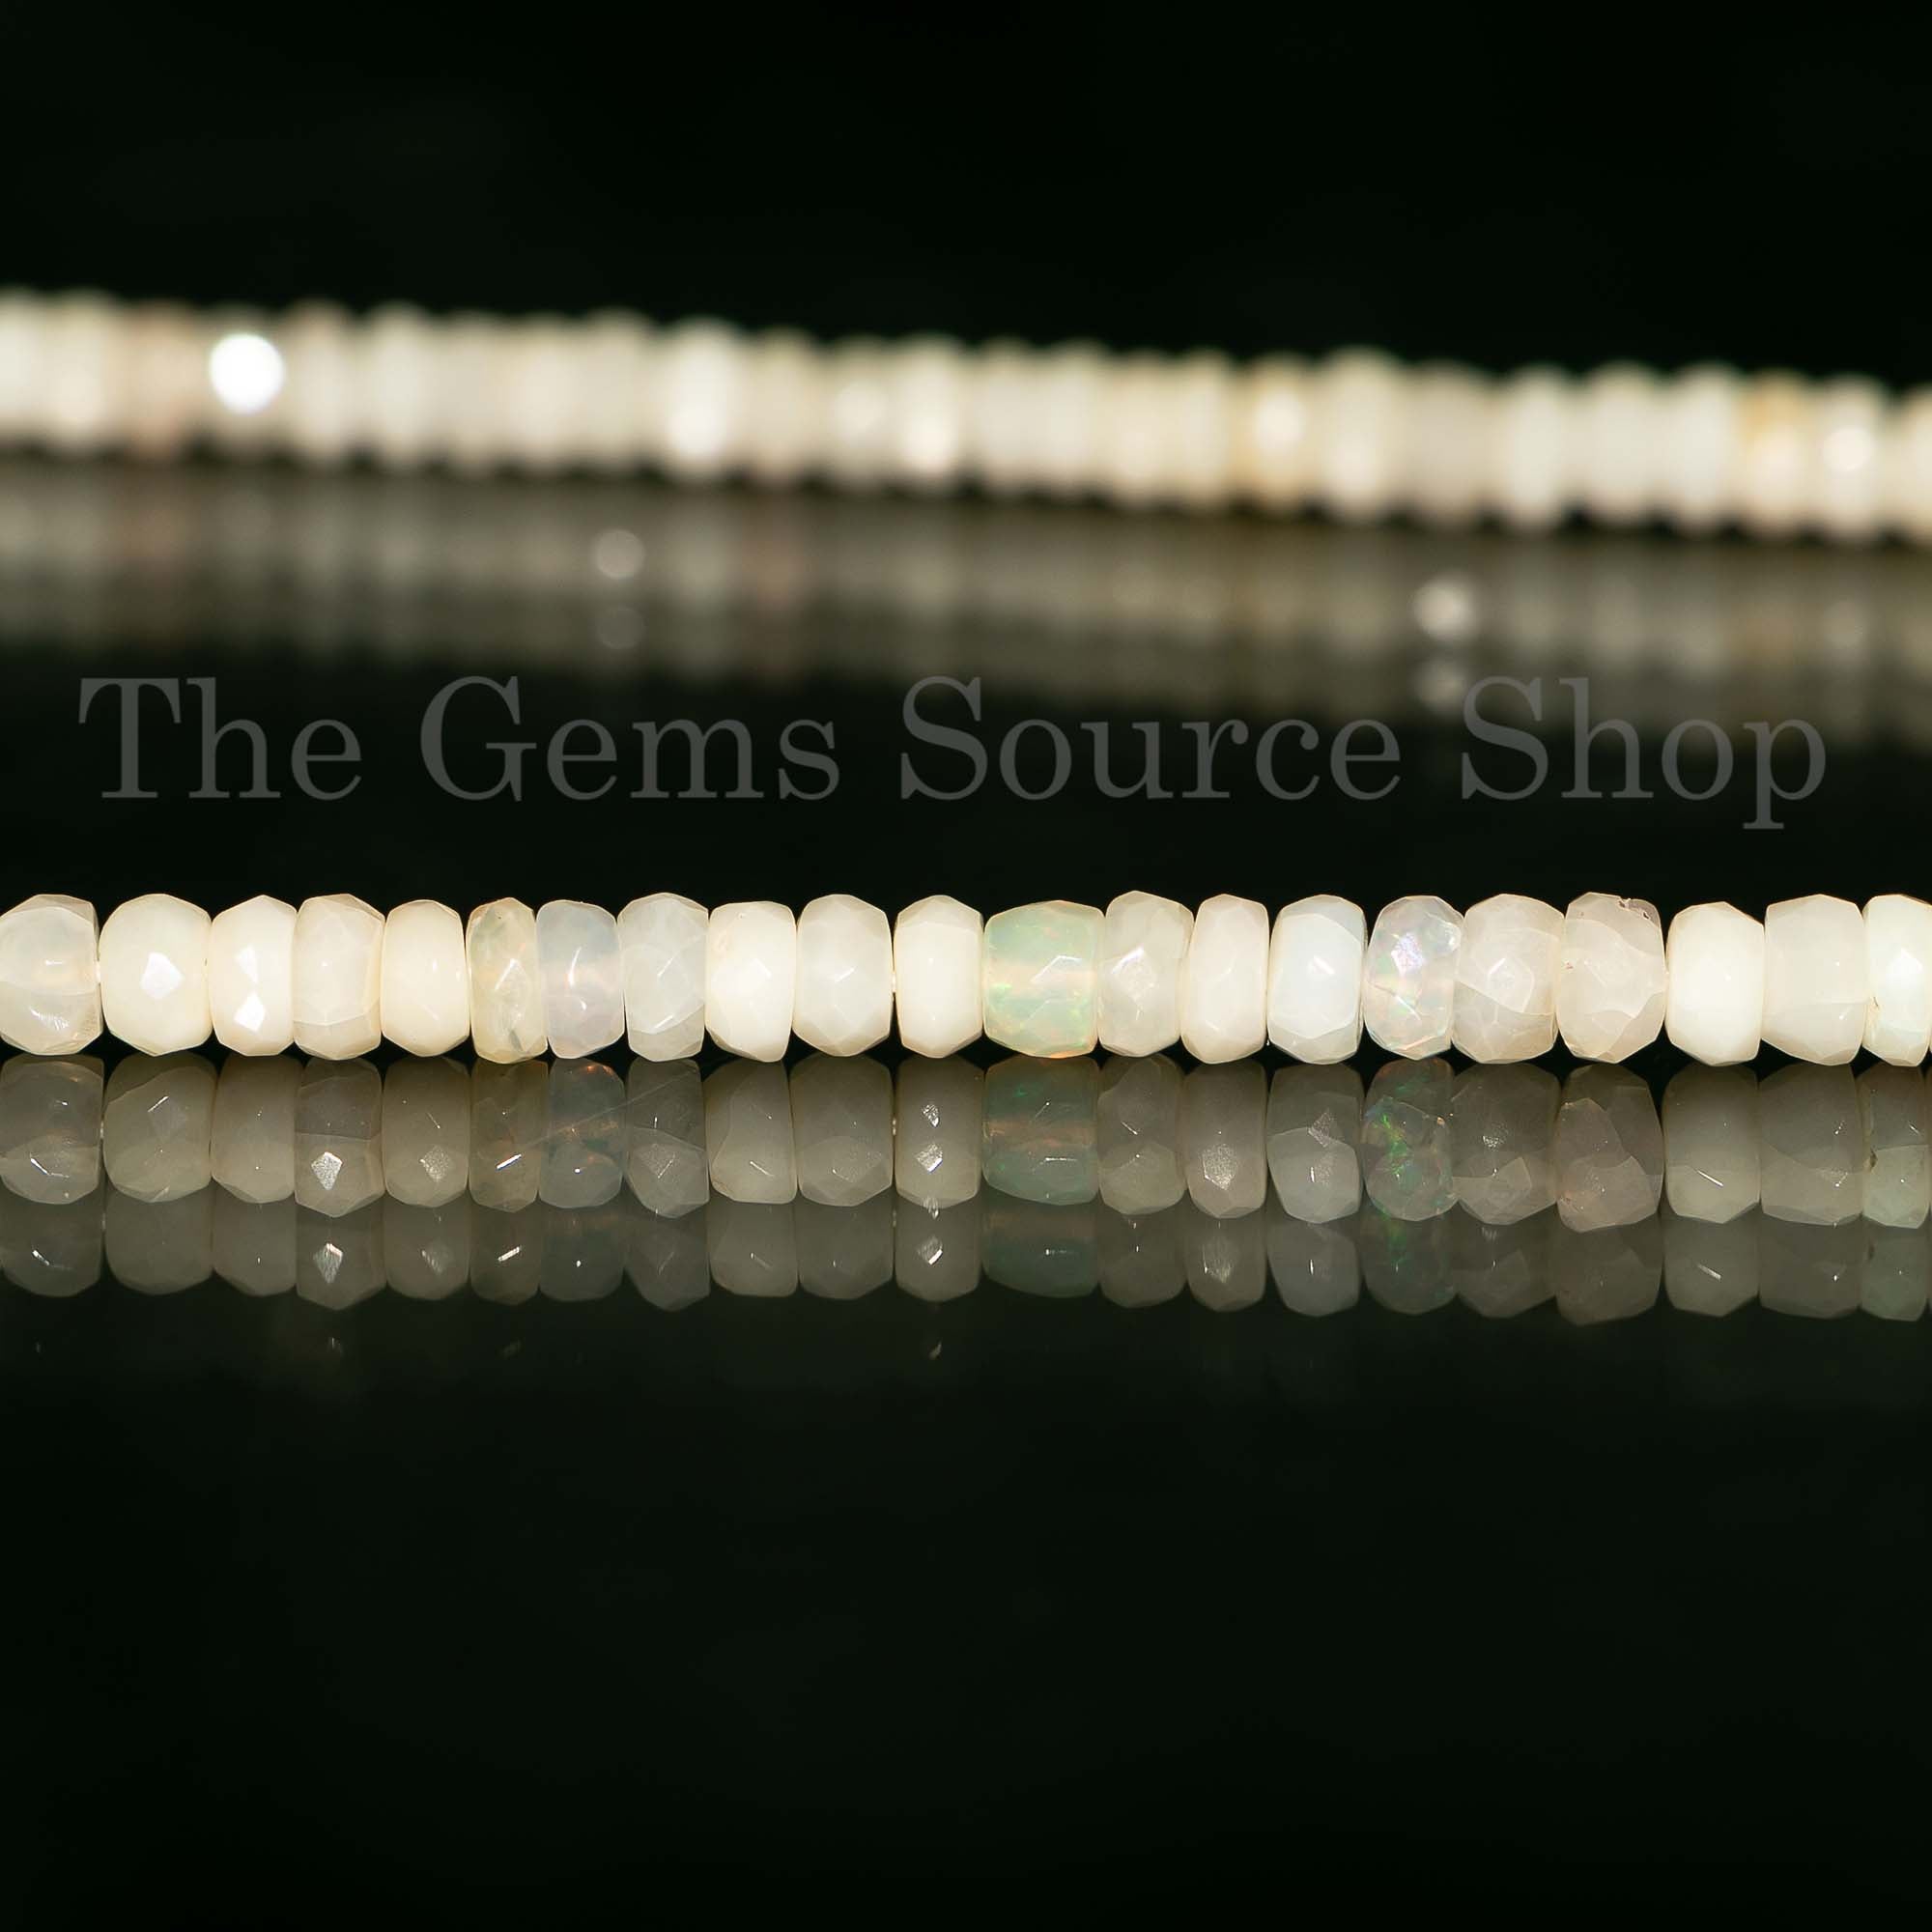 White Ethiopian Opal Faceted Rondelle Beads, 3.5-6mm Ethiopian Opal Beads, White Ethiopian Opal Rondelle, Fire Opal Faceted Beads